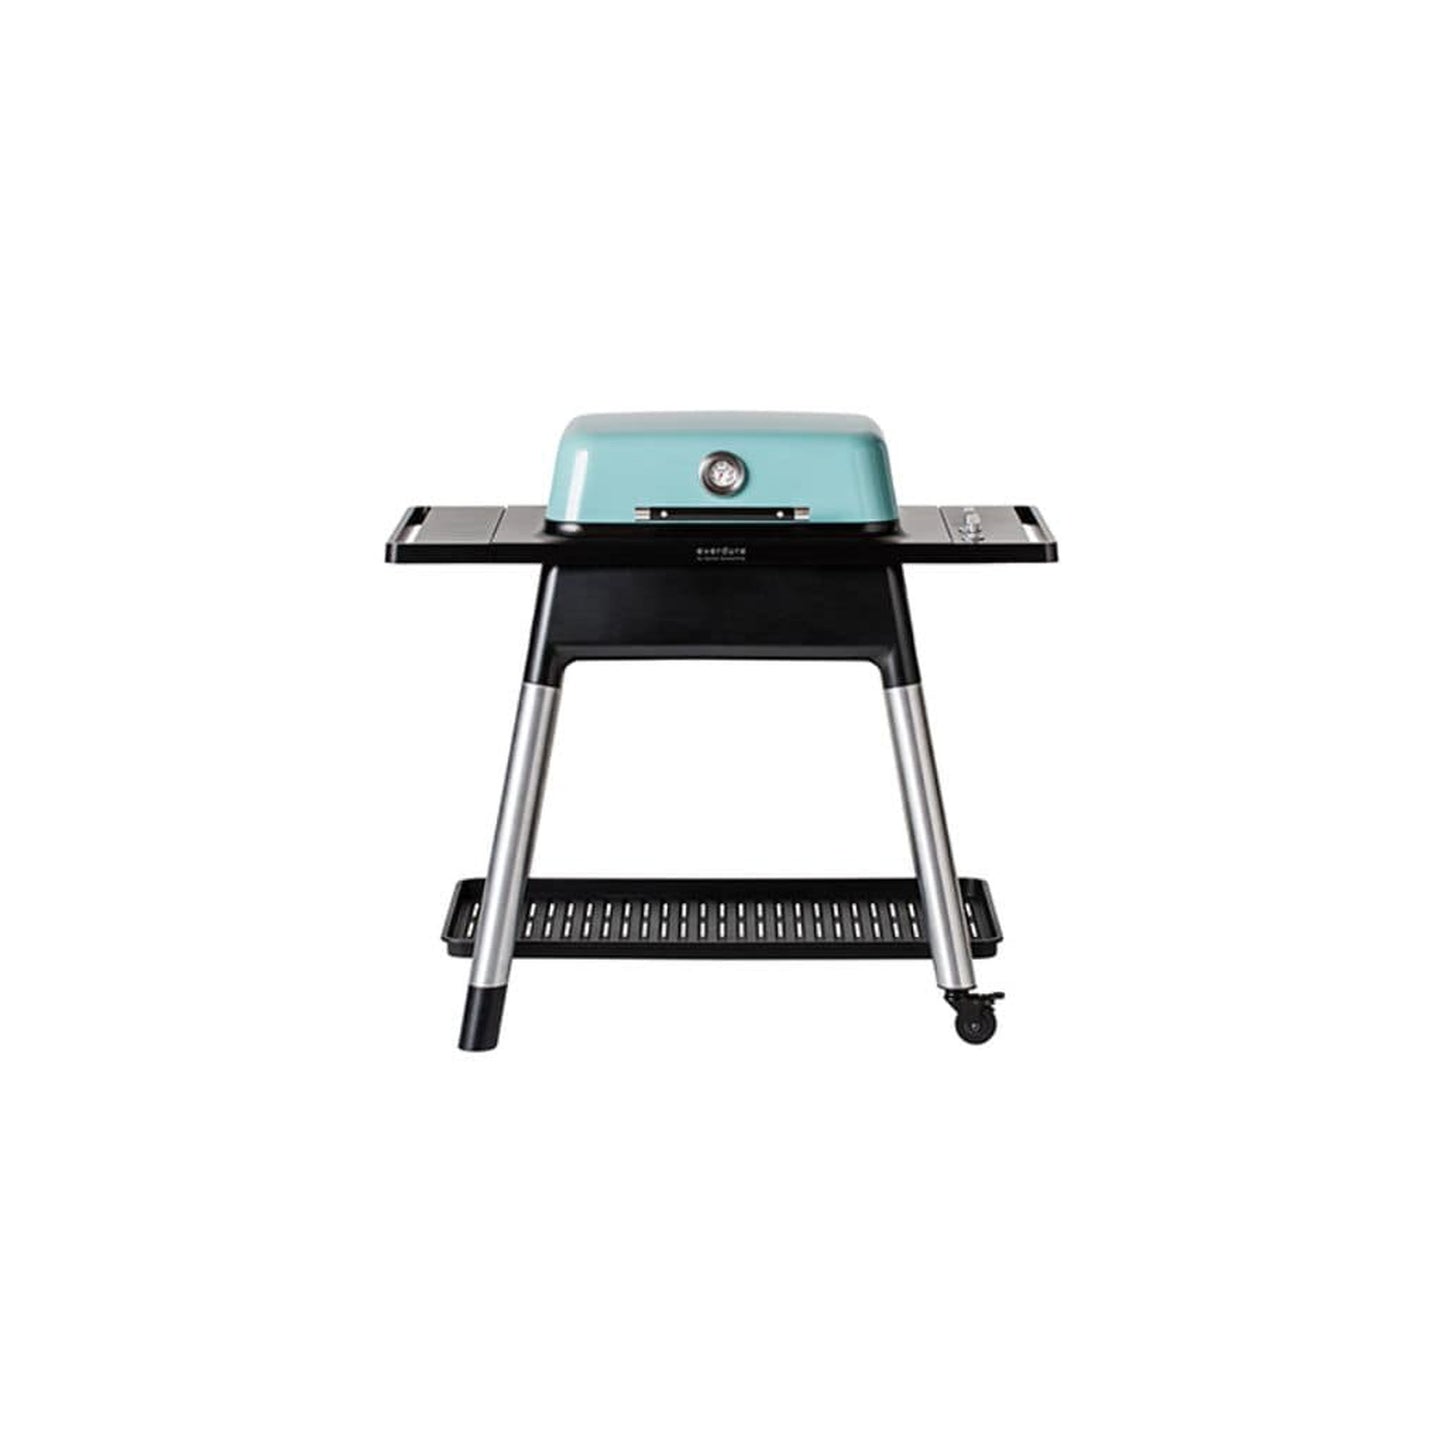 Everdure 46" FORCE™ 2 Burner Gas Grill with High Hood and Stand